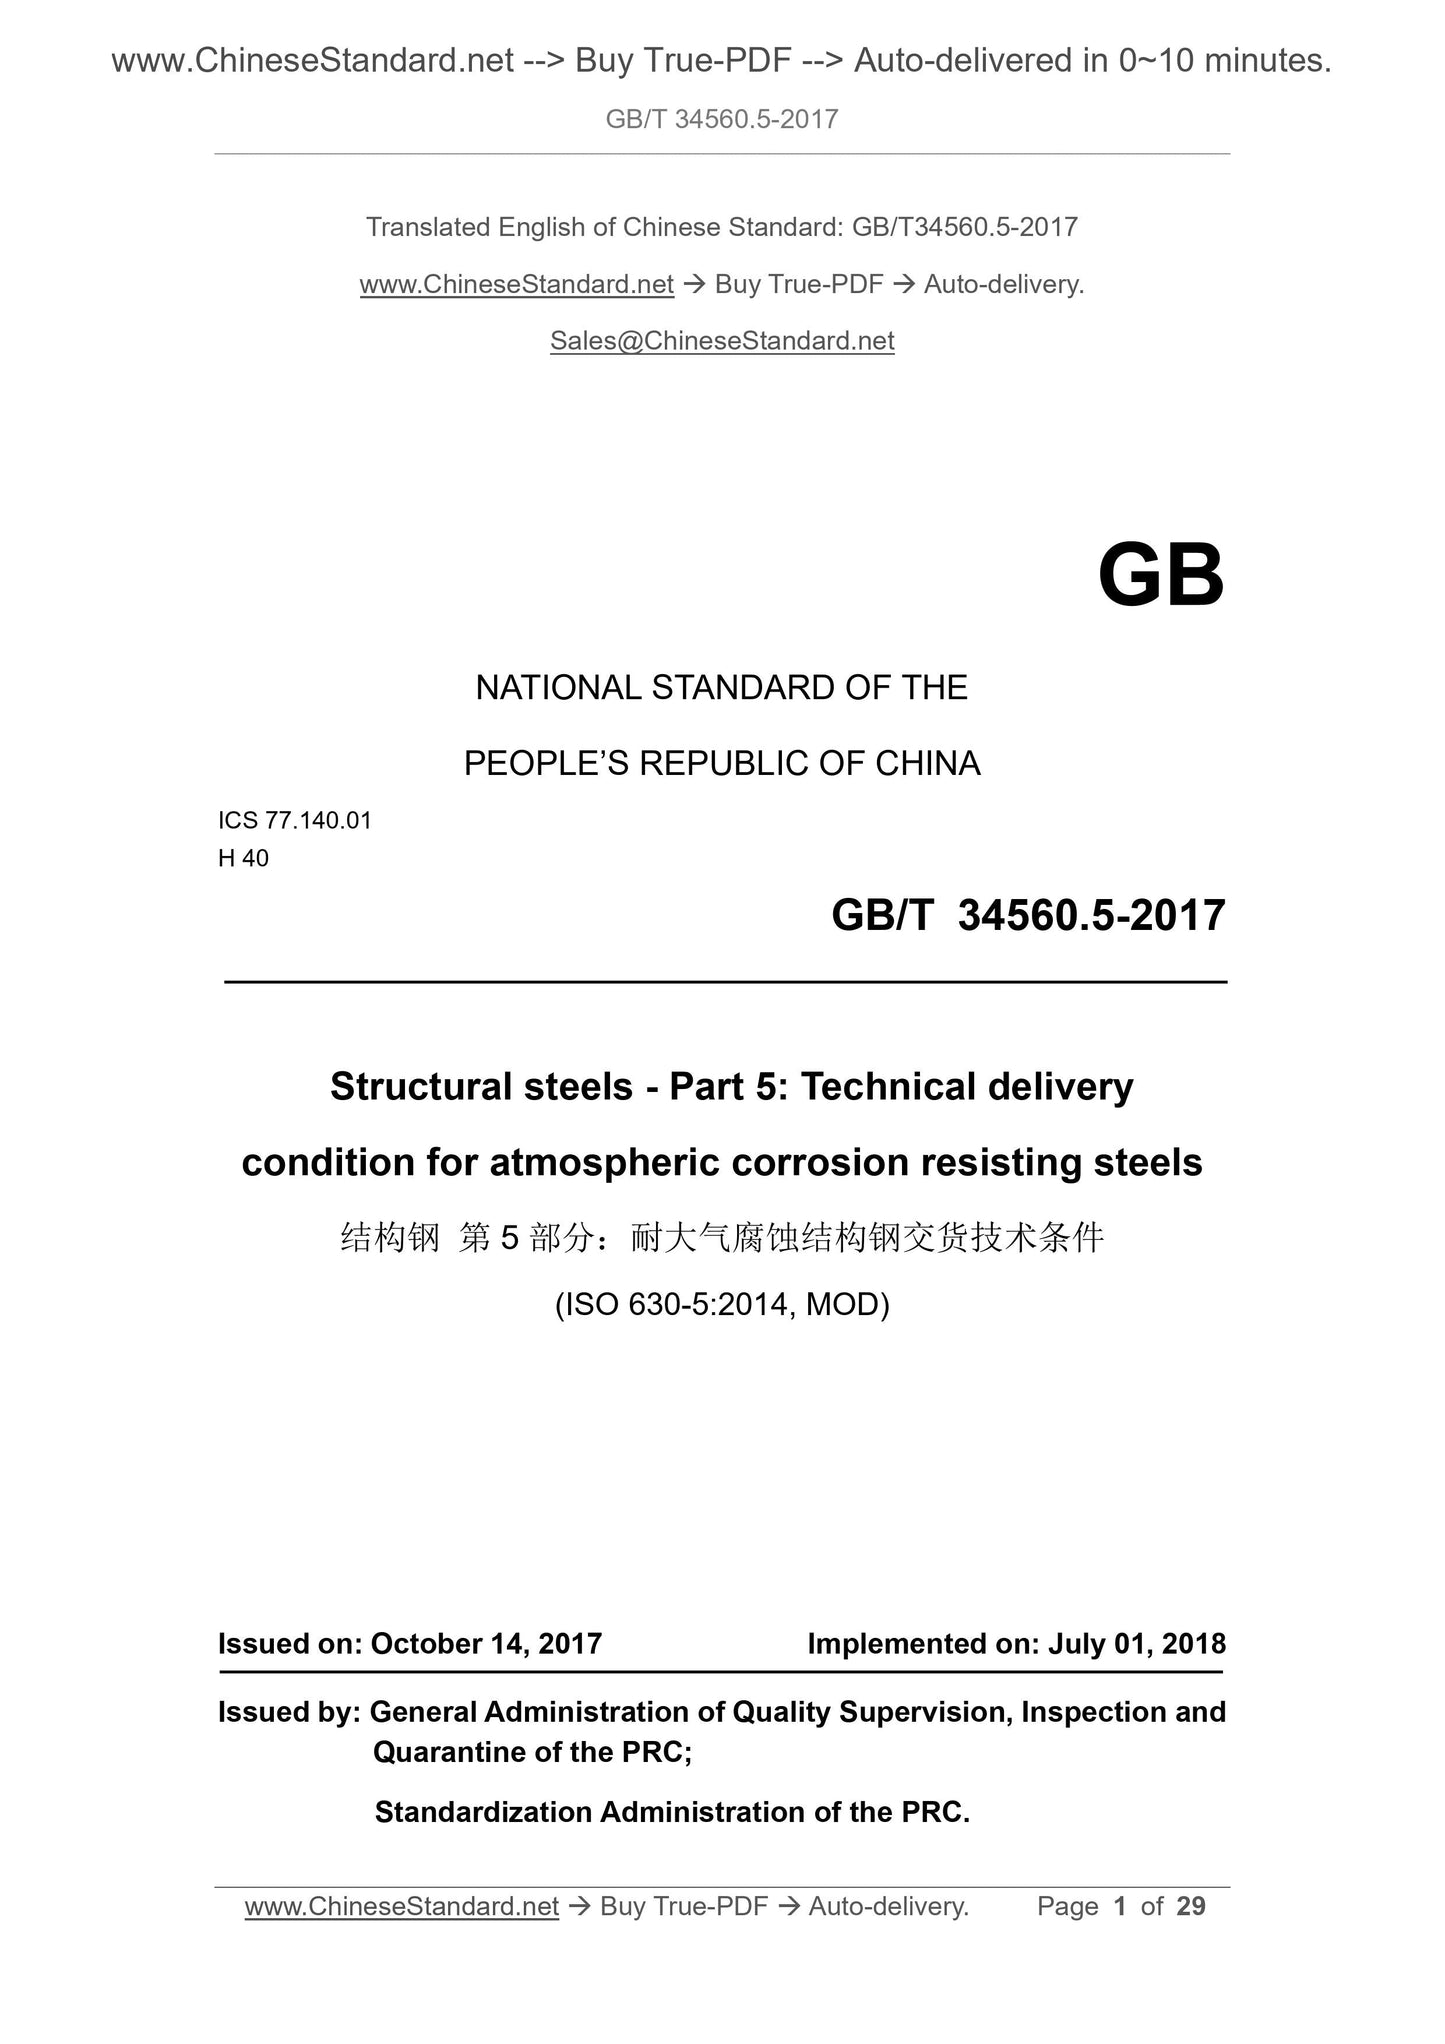 GB/T 34560.5-2017 Page 1